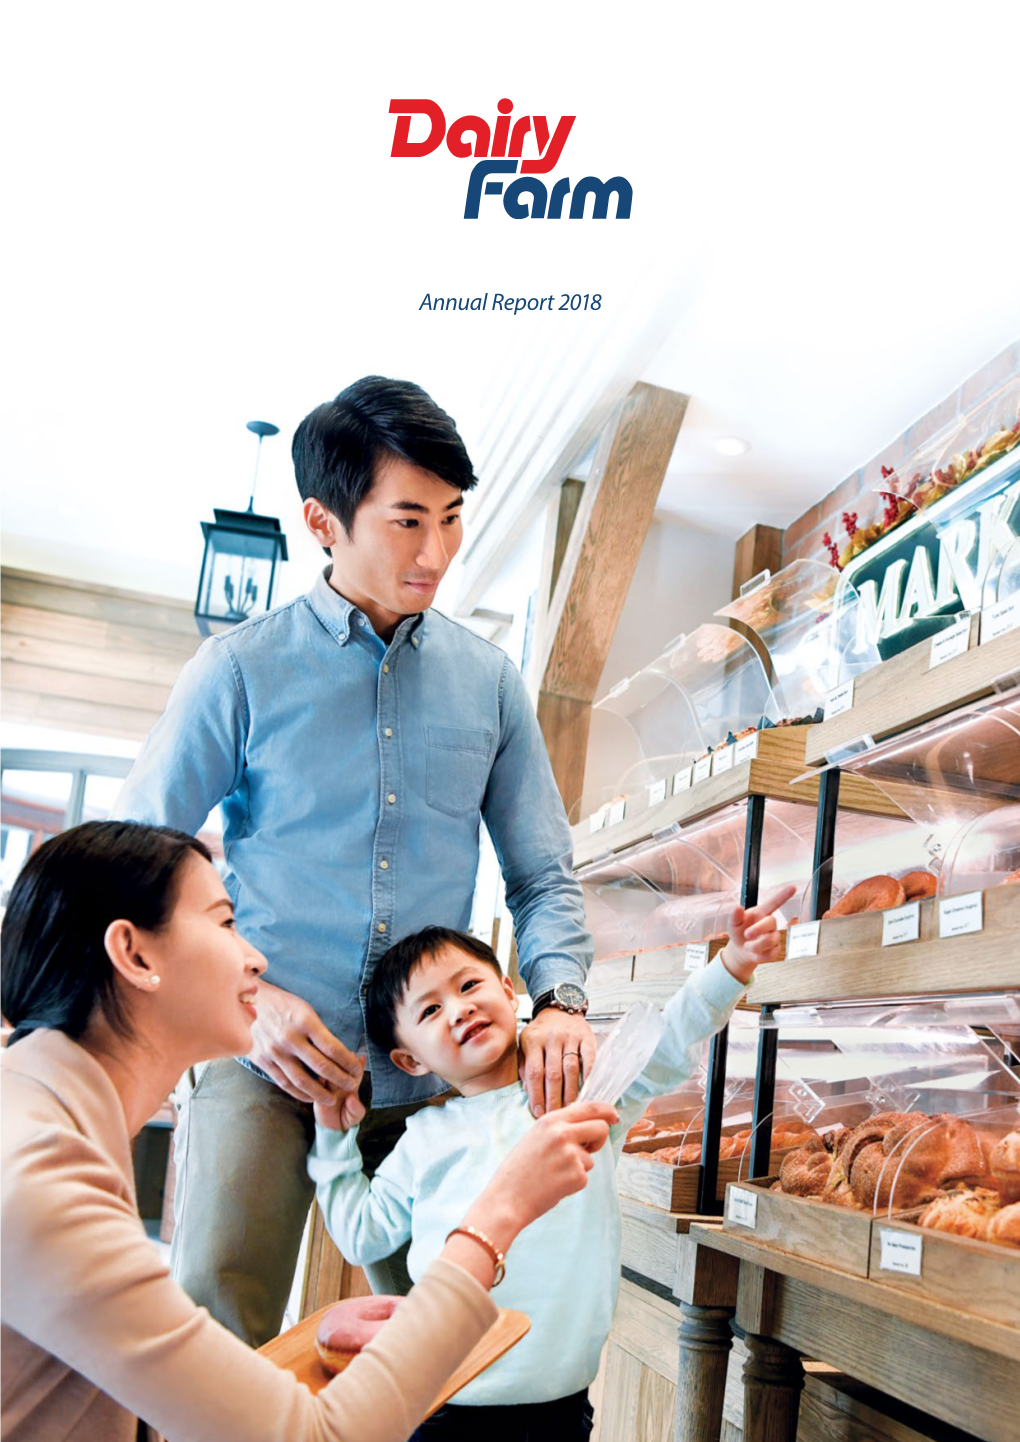 Annual Report 2018 Our Goal : “ to Give Our Customers Across Asia a Store They